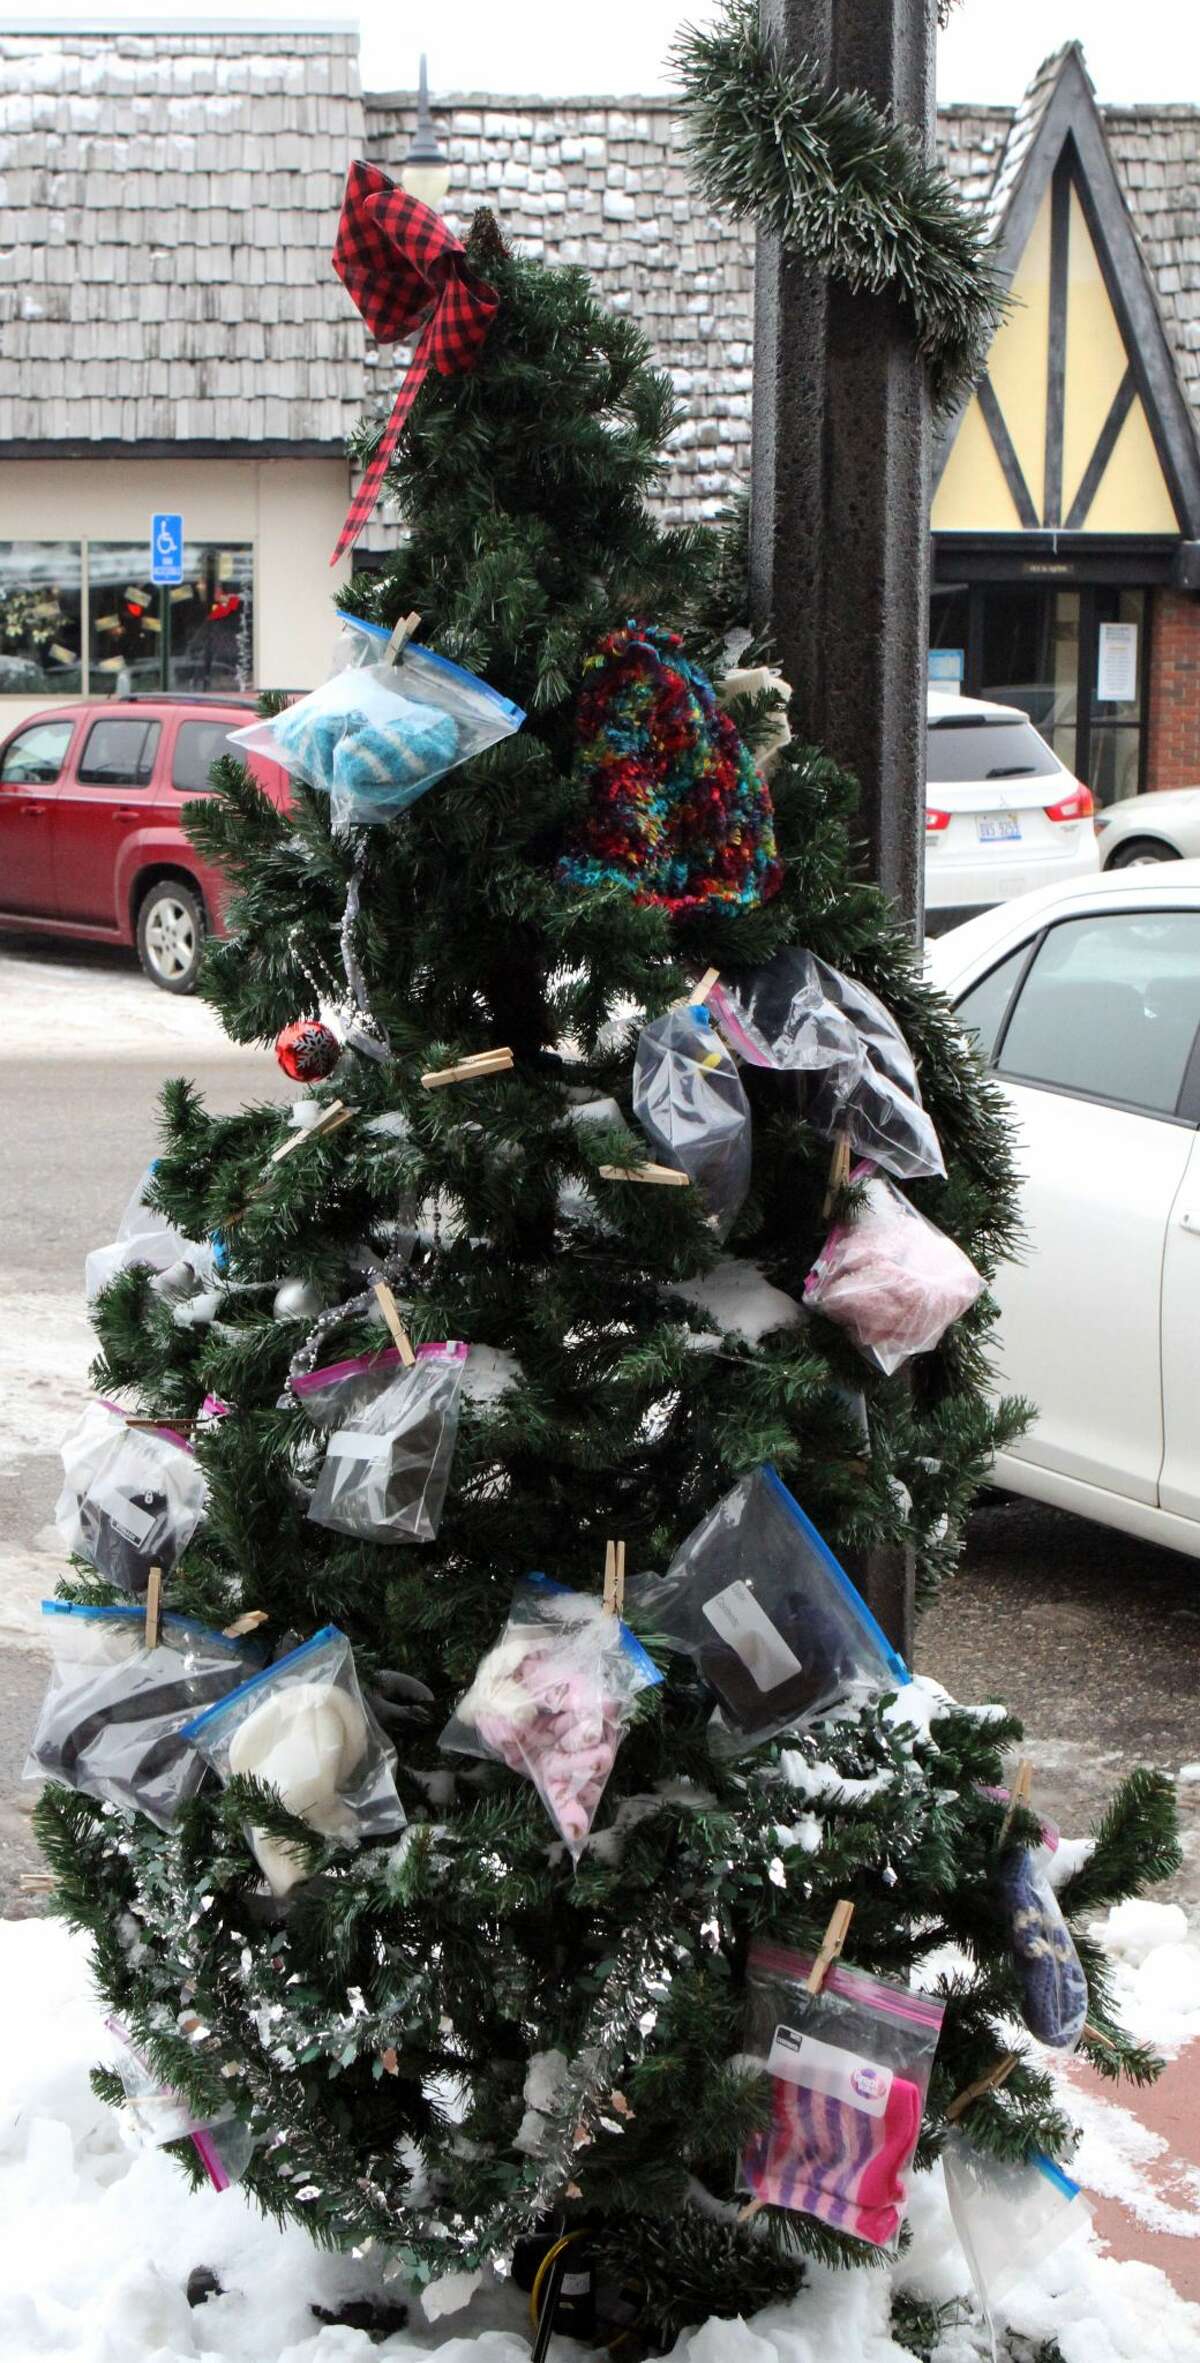 Located in front of Sunny's Bar and Grill in downtown Reed City, this Christmas giving tree has been a place for locals to both give and receive much-needed gifts, such as hats and coats.